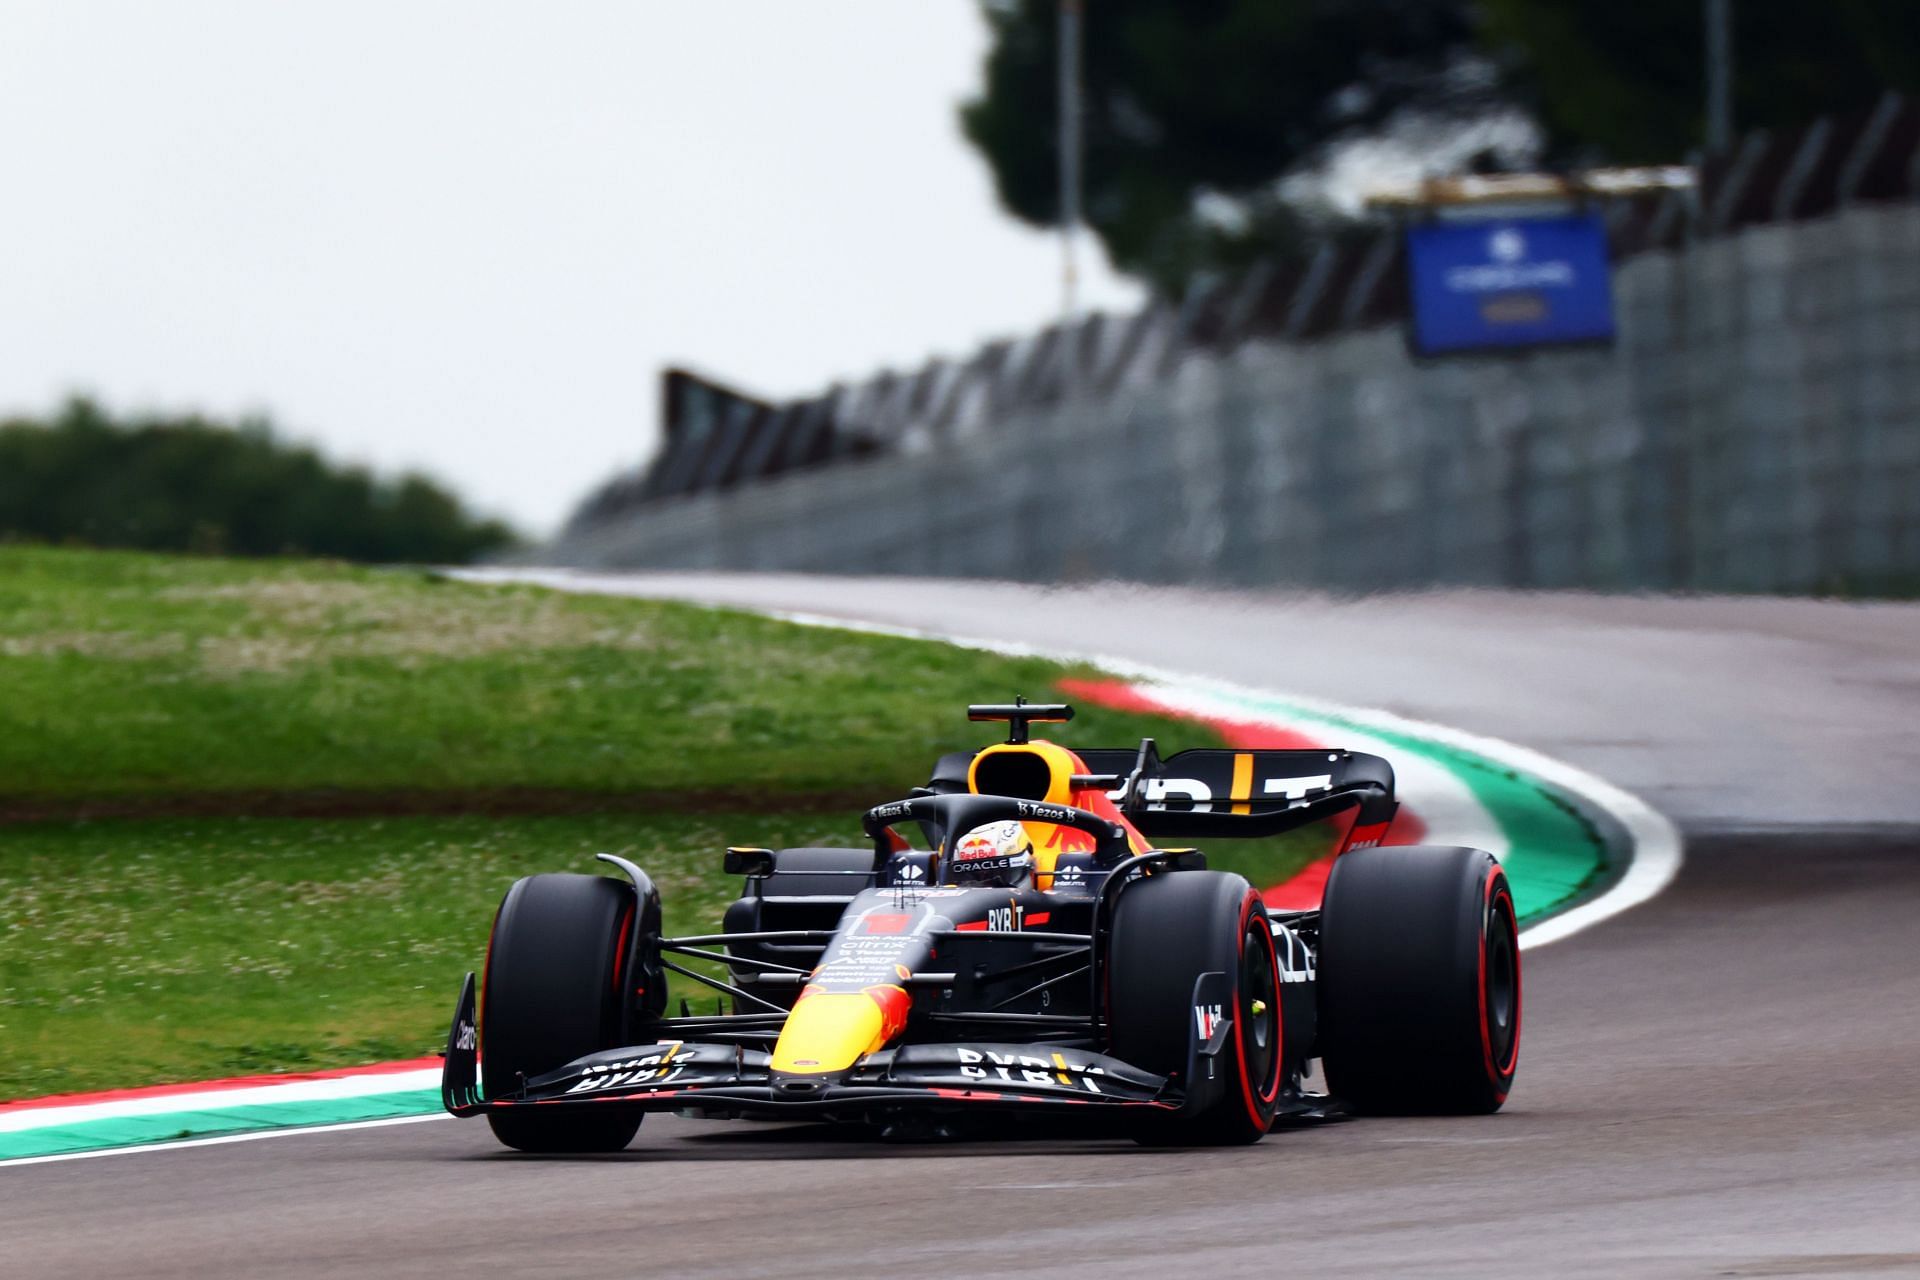 Max Verstappen in action during qualifying for the 2022 F1 Imola GP (Photo by Mark Thompson/Getty Images)